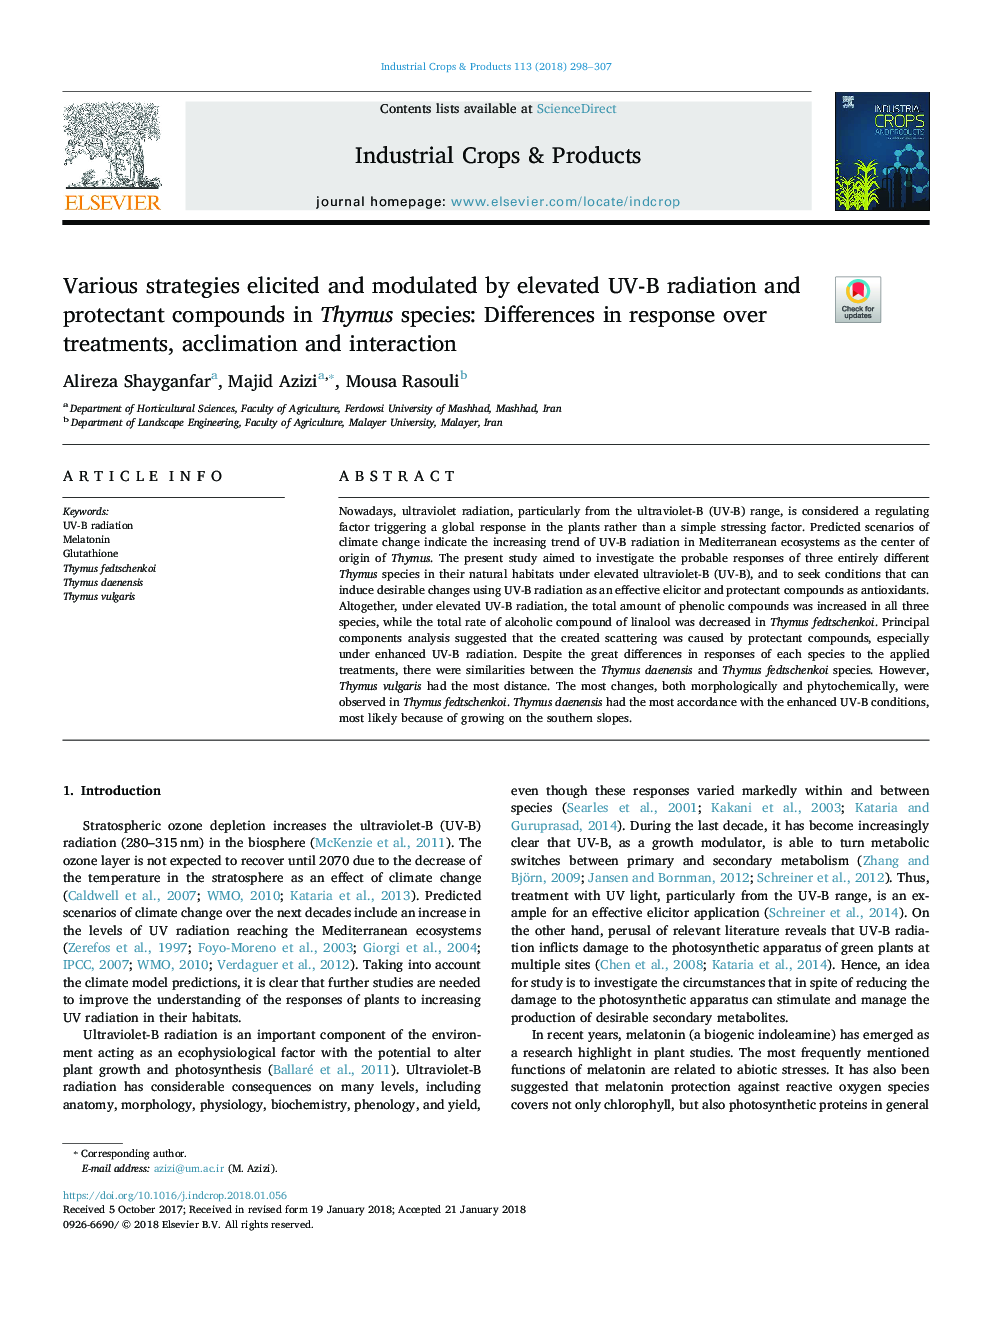 Various strategies elicited and modulated by elevated UV-B radiation and protectant compounds in Thymus species: Differences in response over treatments, acclimation and interaction